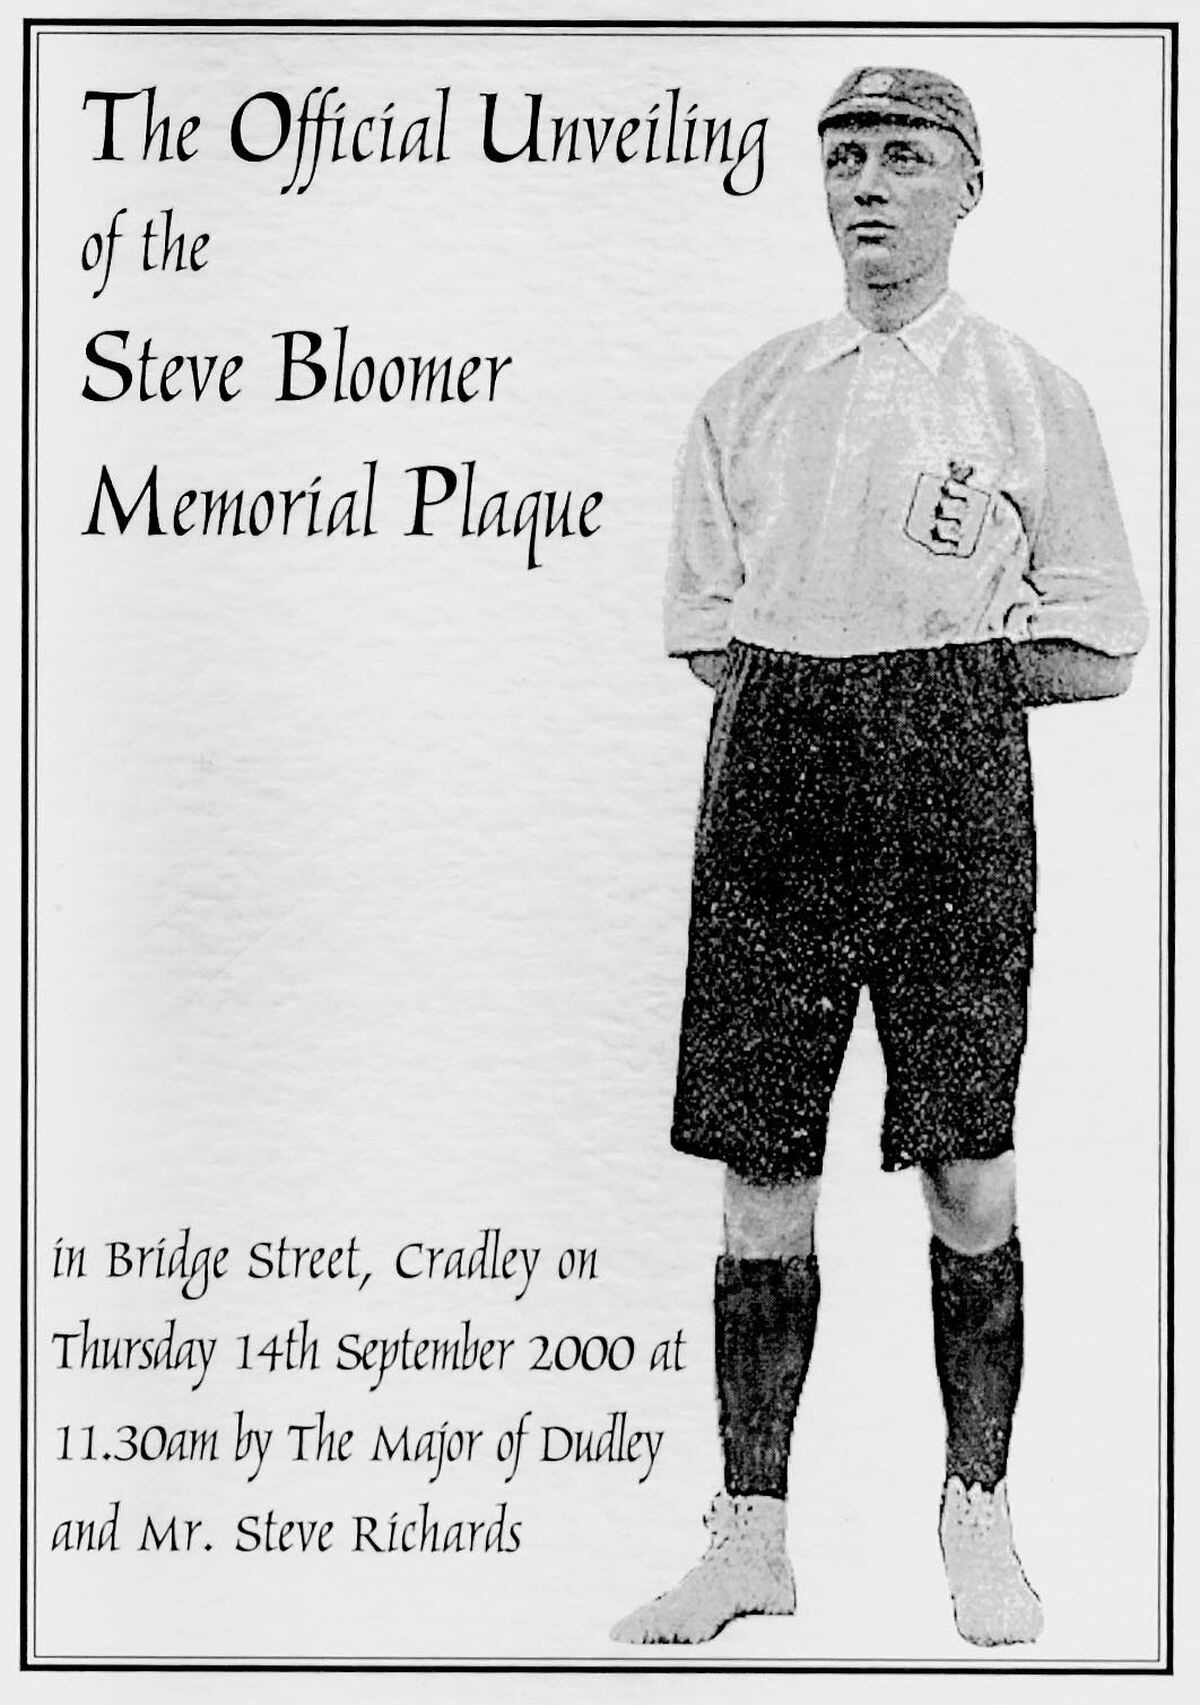 The programme for the unveiling of the Steve Bloomer memorial plaque in 2000